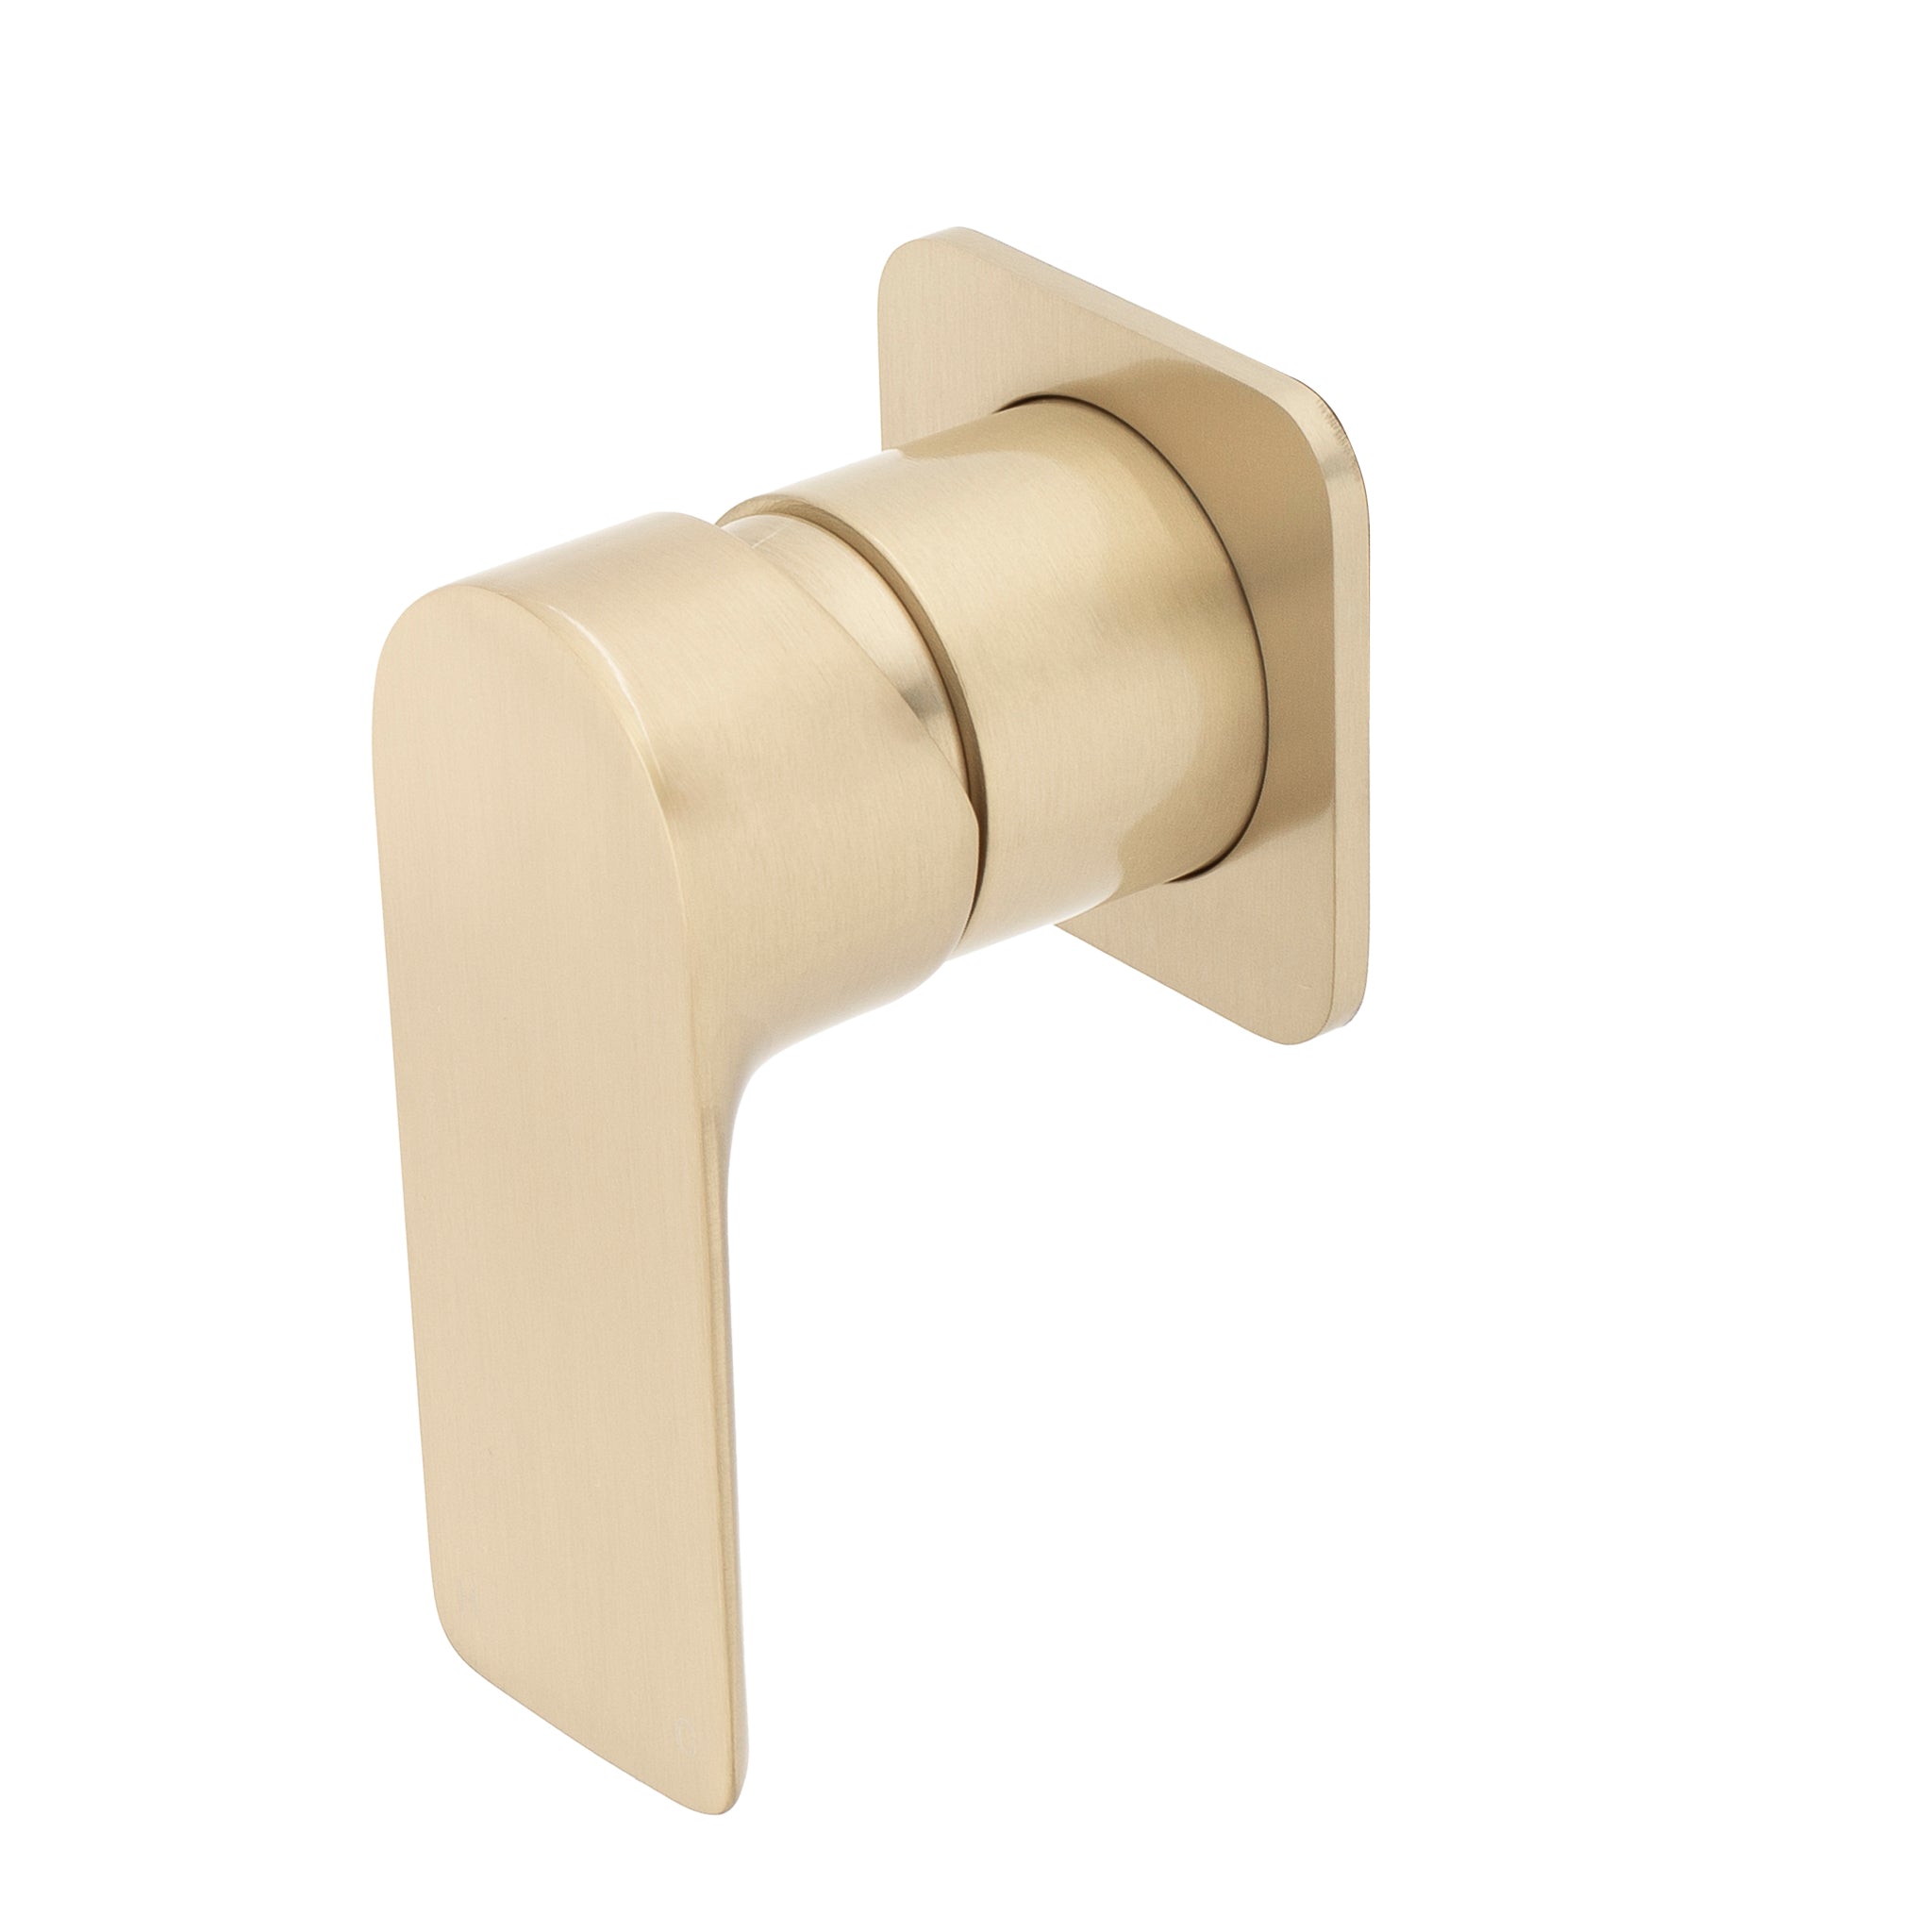 Jena Shower/ Bath Wall Mixer with Square Plates, Brushed Brass (Gold)